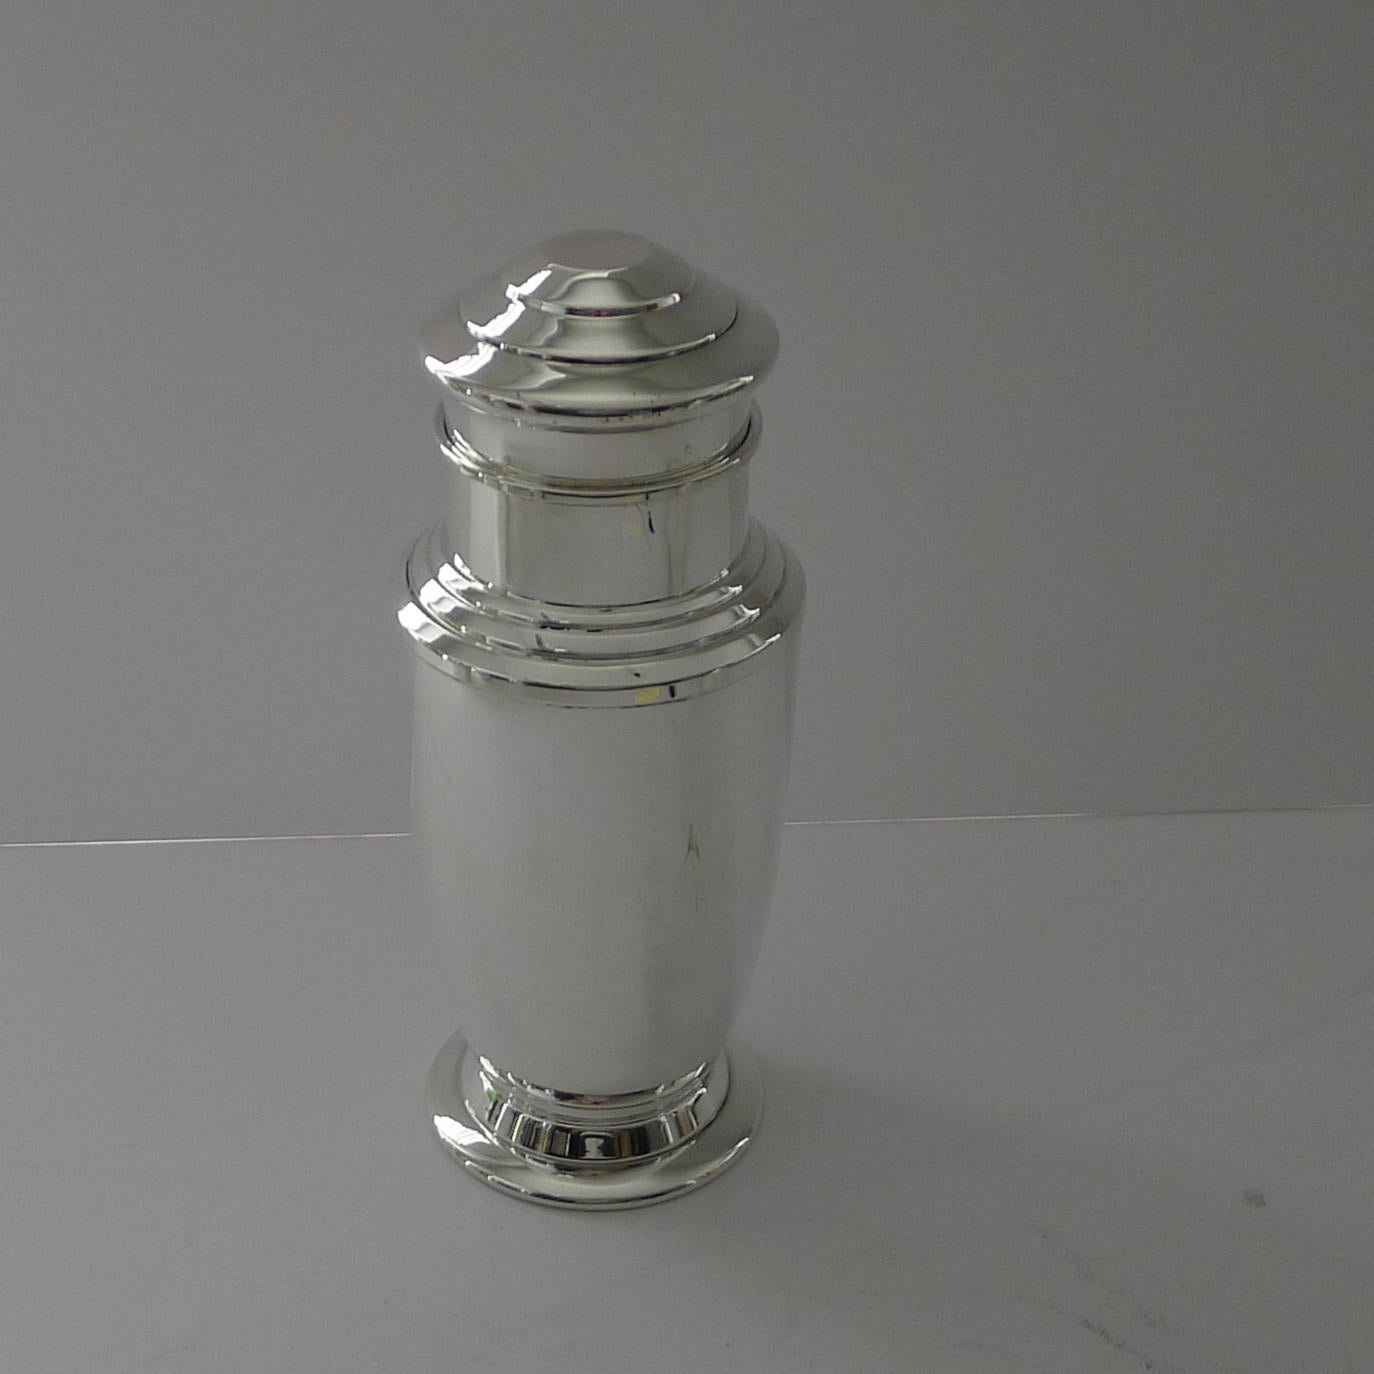 A superb, handsome and unusual silver plated cocktail shaker, very handsome and very Art Deco dating to c.1940.

Two pieces, with an integral strainer inside the shaker. Just back from our silversmith's workshop where it has been professionally